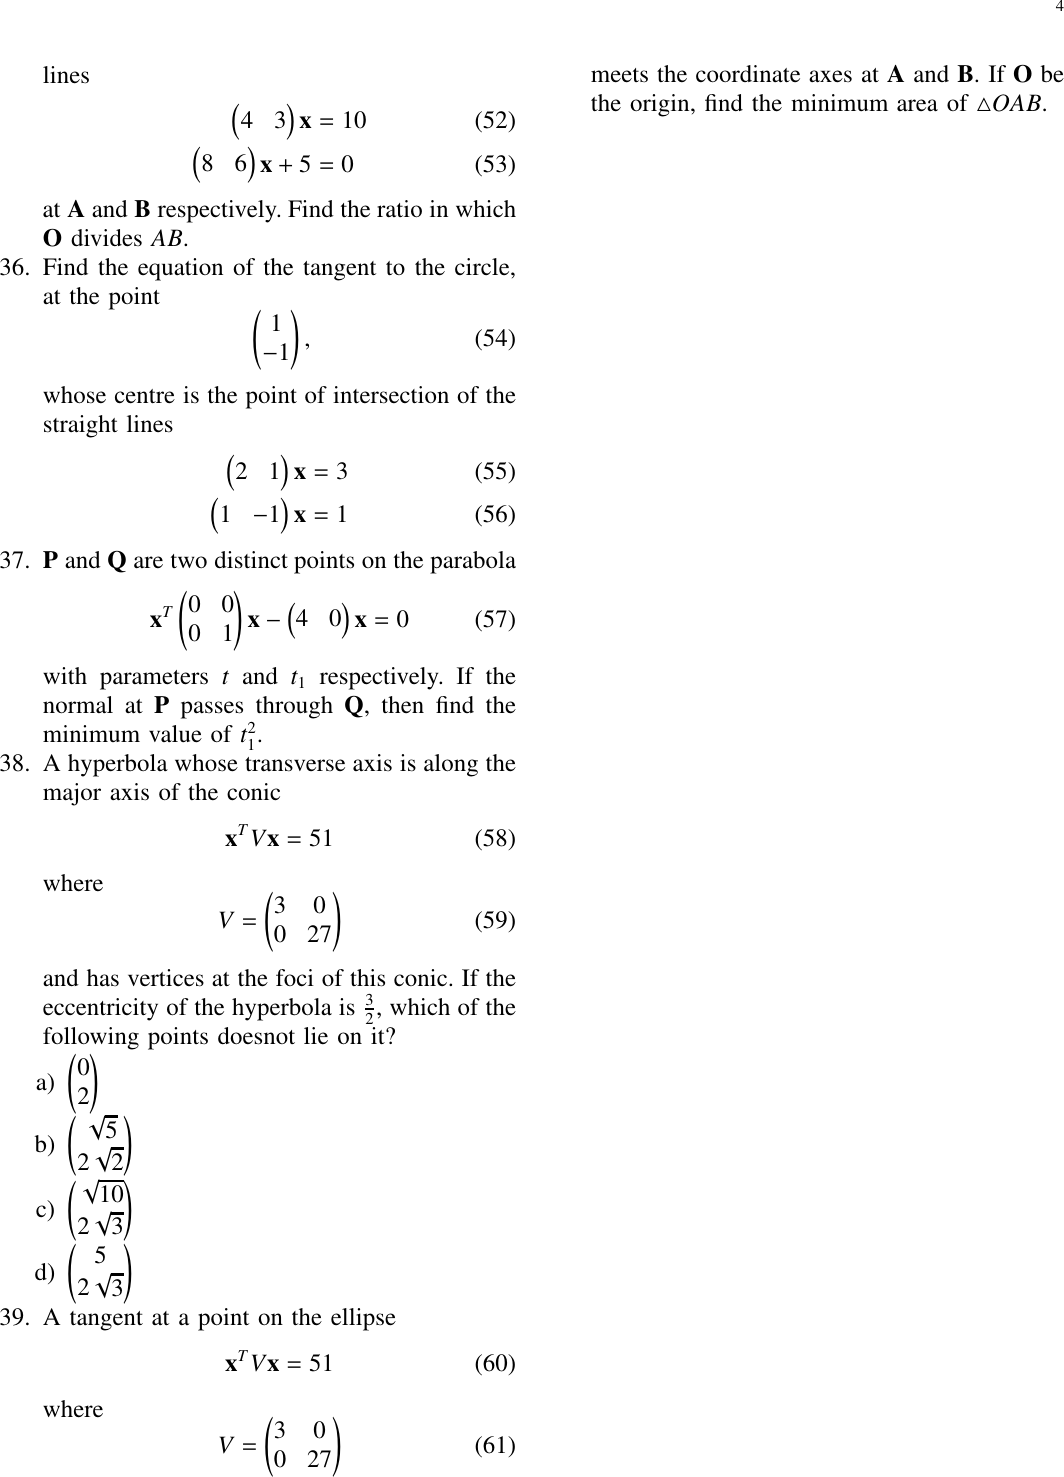 Page 4 of 4 - Manual 4 Jee Linalg 2d